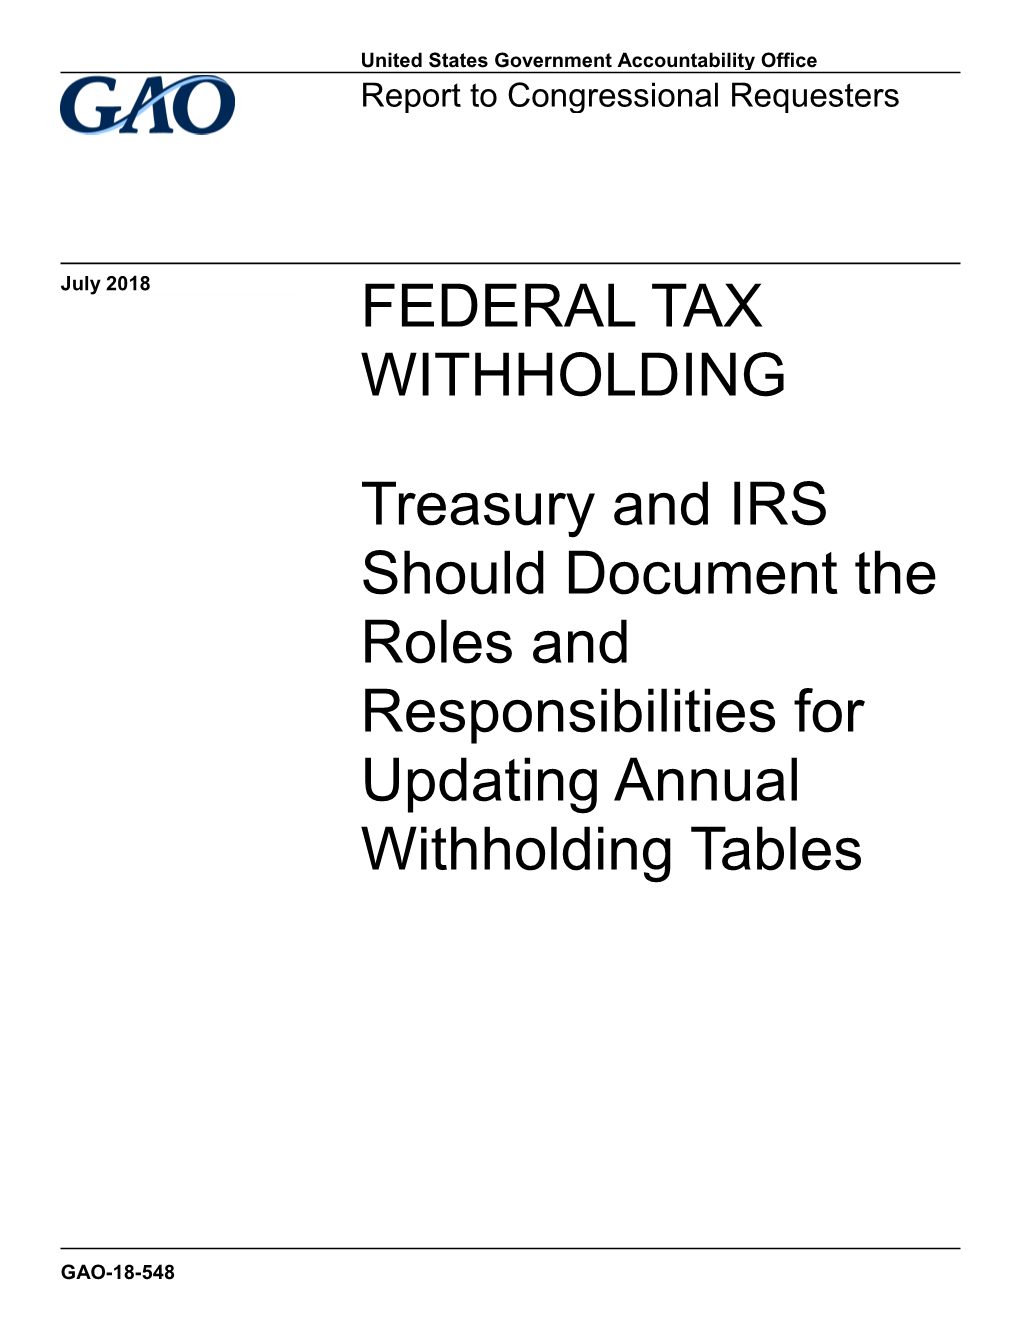 GAO-18-548, FEDERAL TAX WITHHOLDING: Treasury and IRS